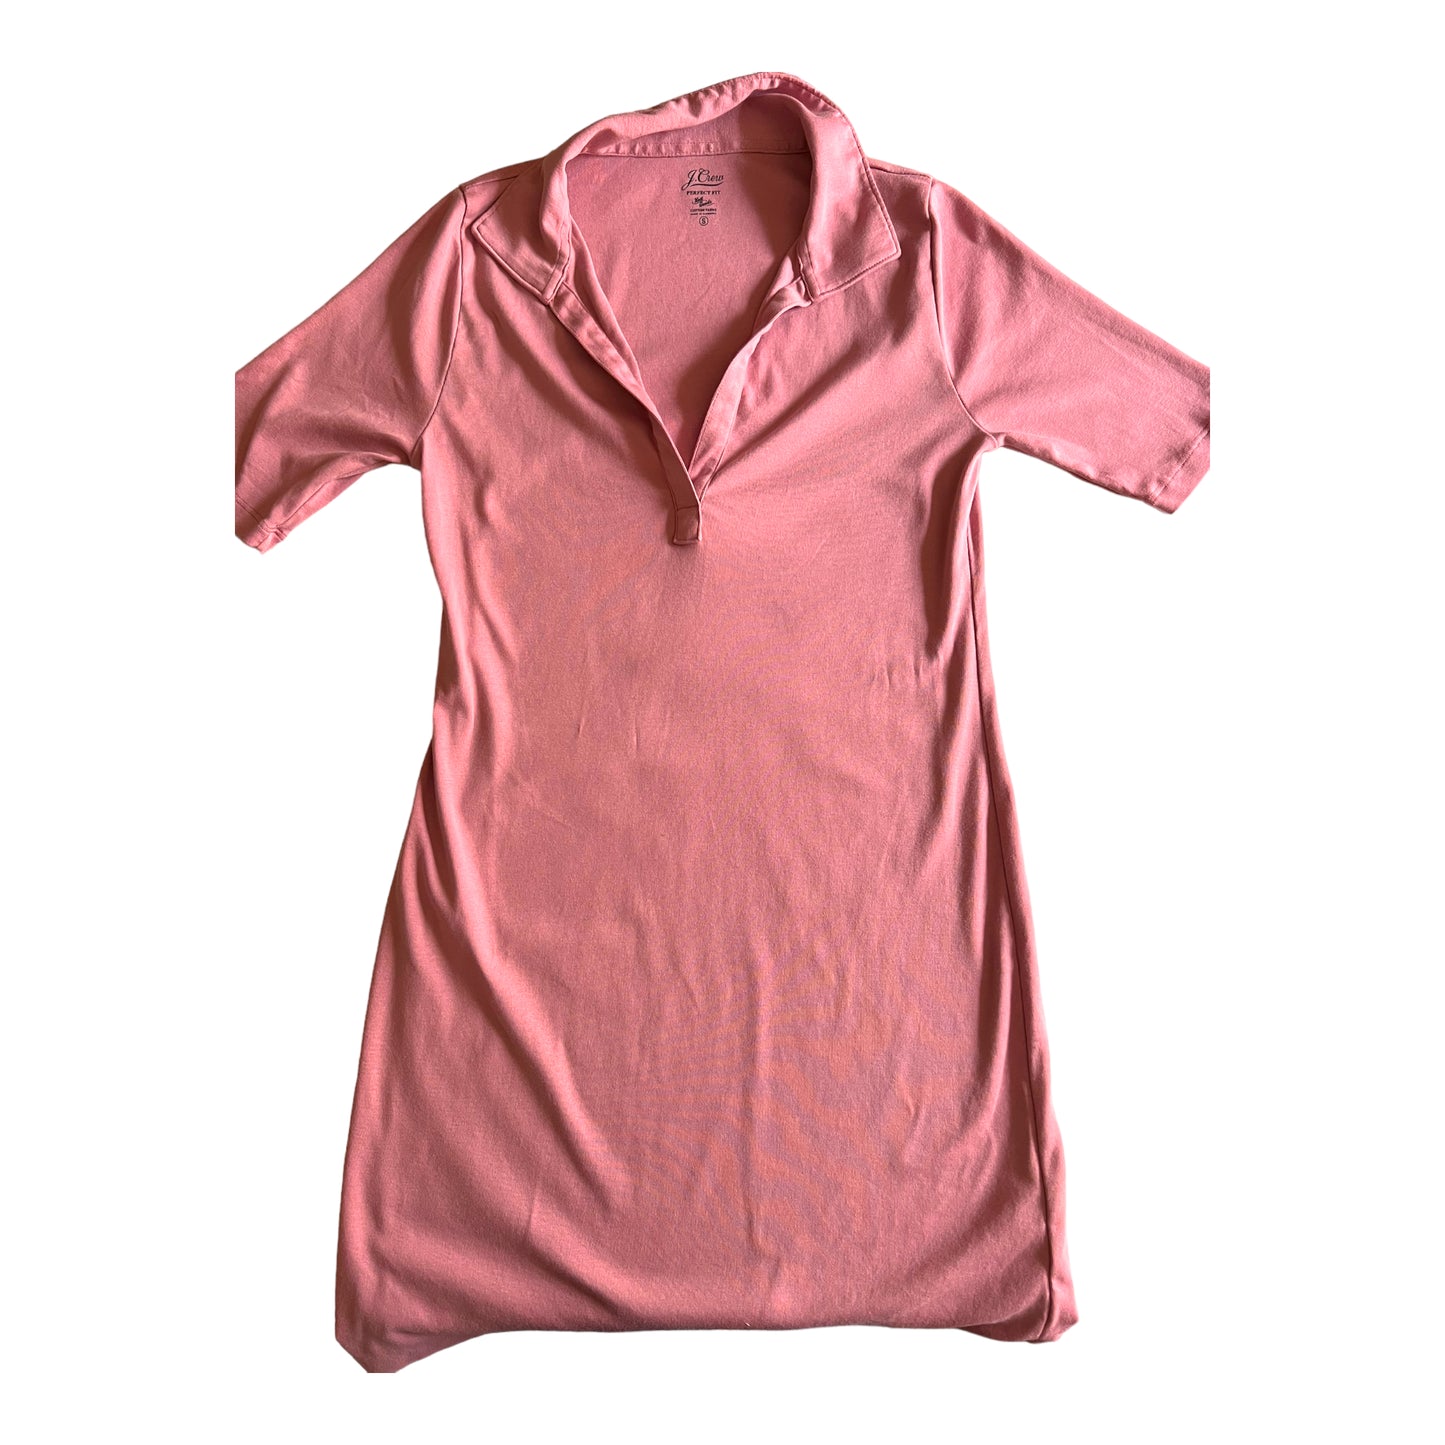 Reduced! J. Crew Perfect Fit Pink T-shirt Dress Size Small